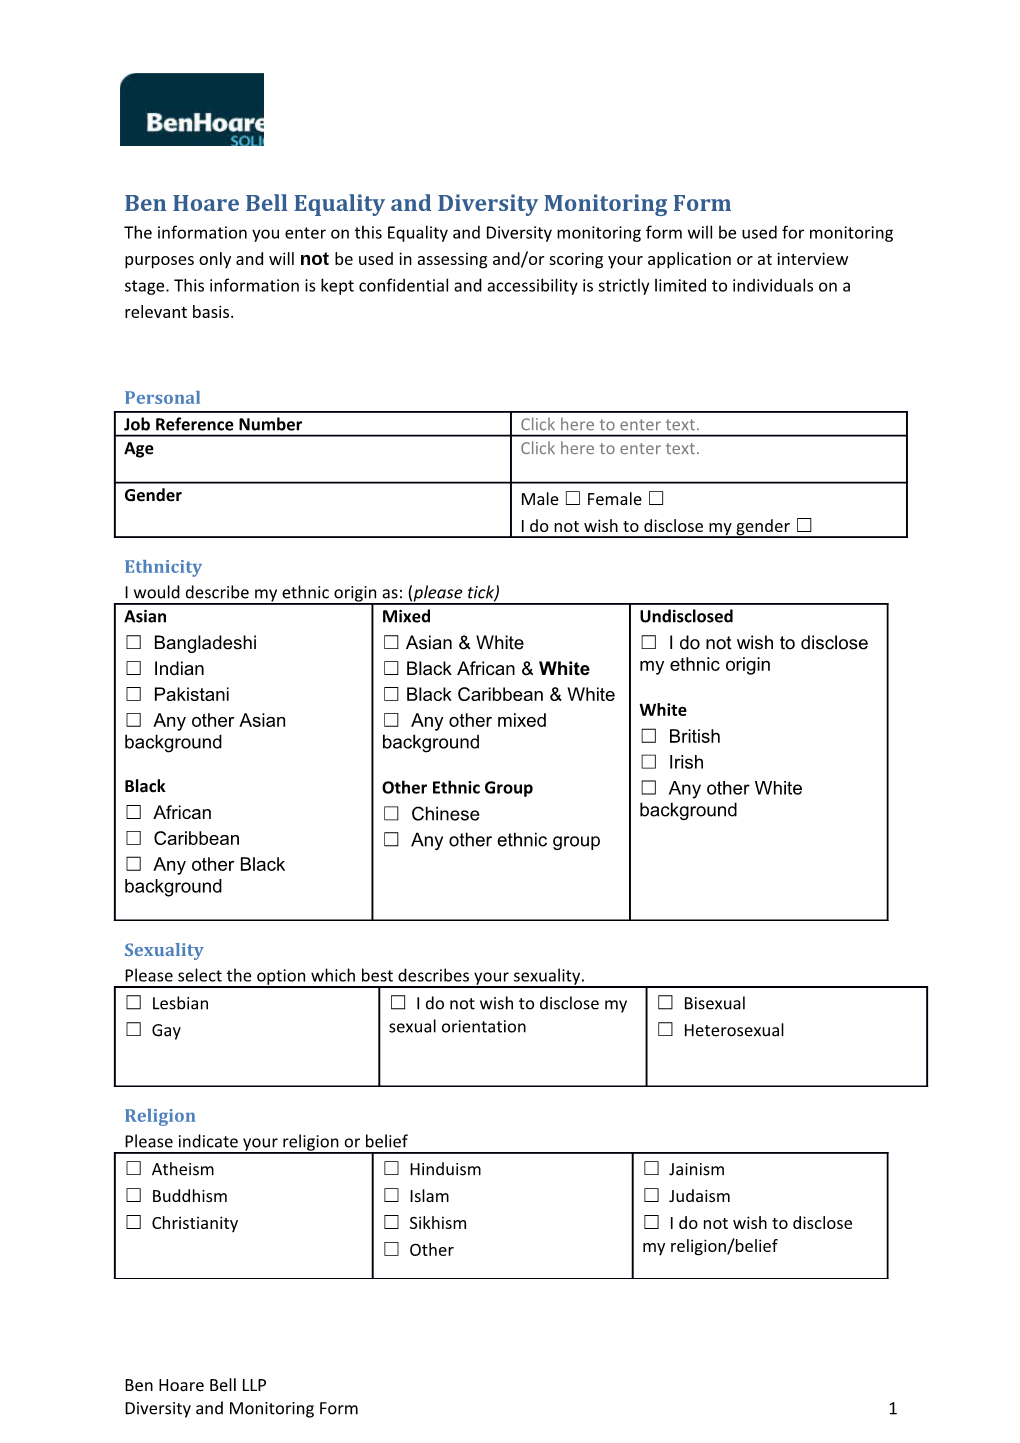 Ben Hoare Bell Equality and Diversity Monitoring Form